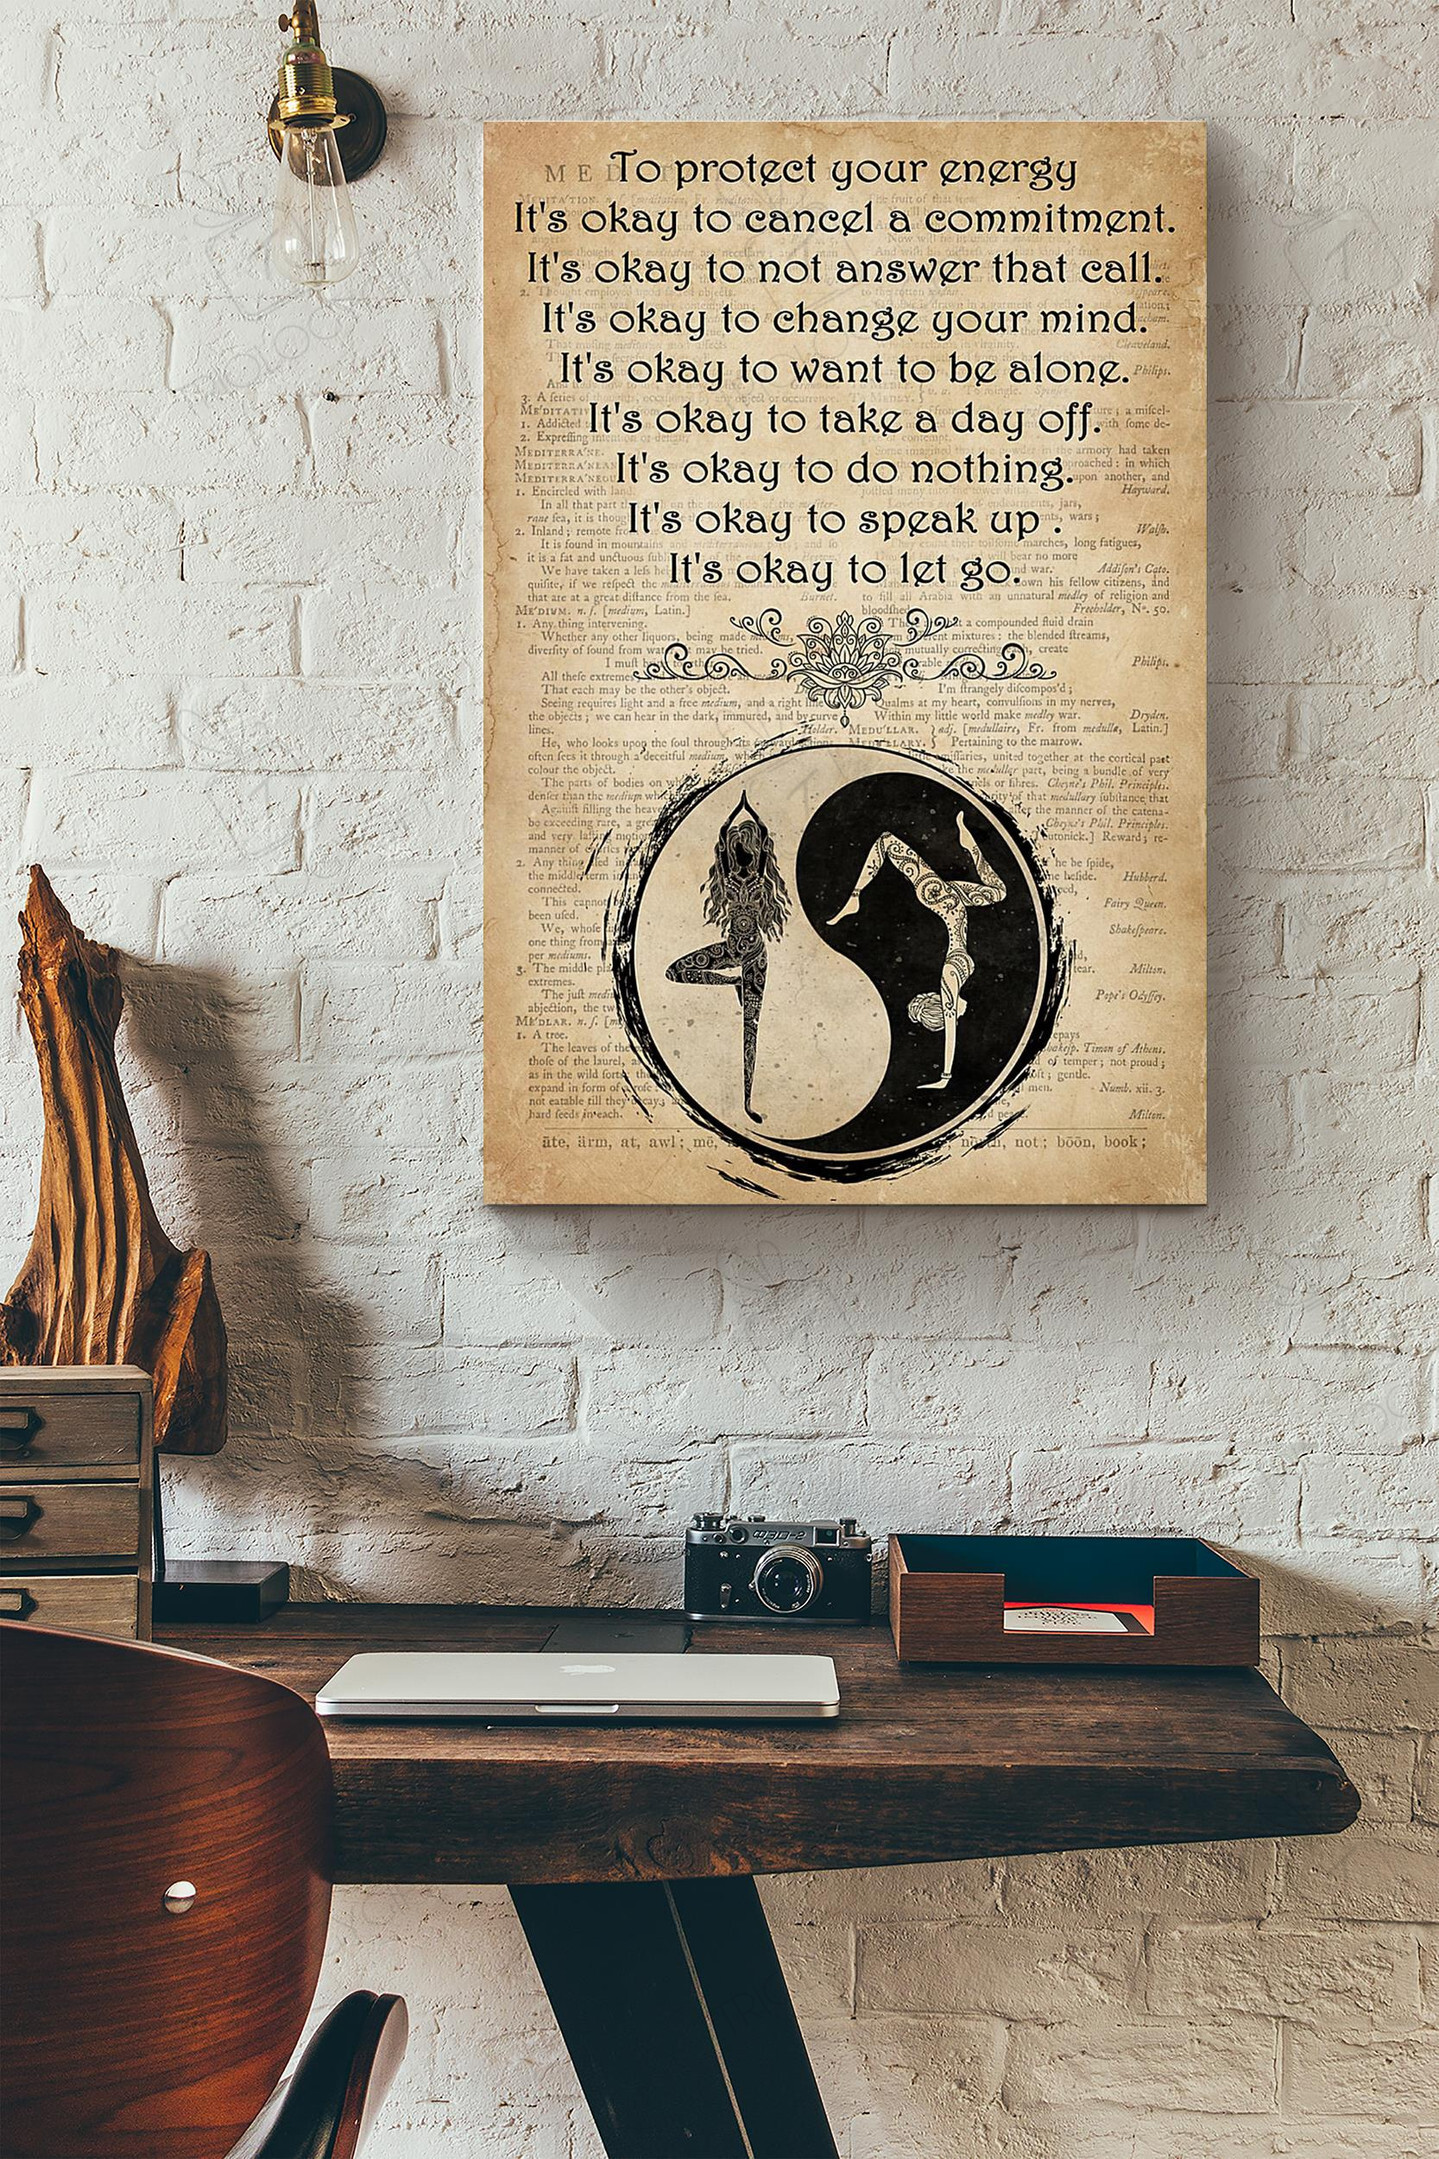 Yin Yang Yoga Yo Protect Your Energy Dictionary Canvas Painting Ideas, Canvas Hanging Prints, Gift Idea Framed Prints, Canvas Paintings Wrapped Canvas 8x10